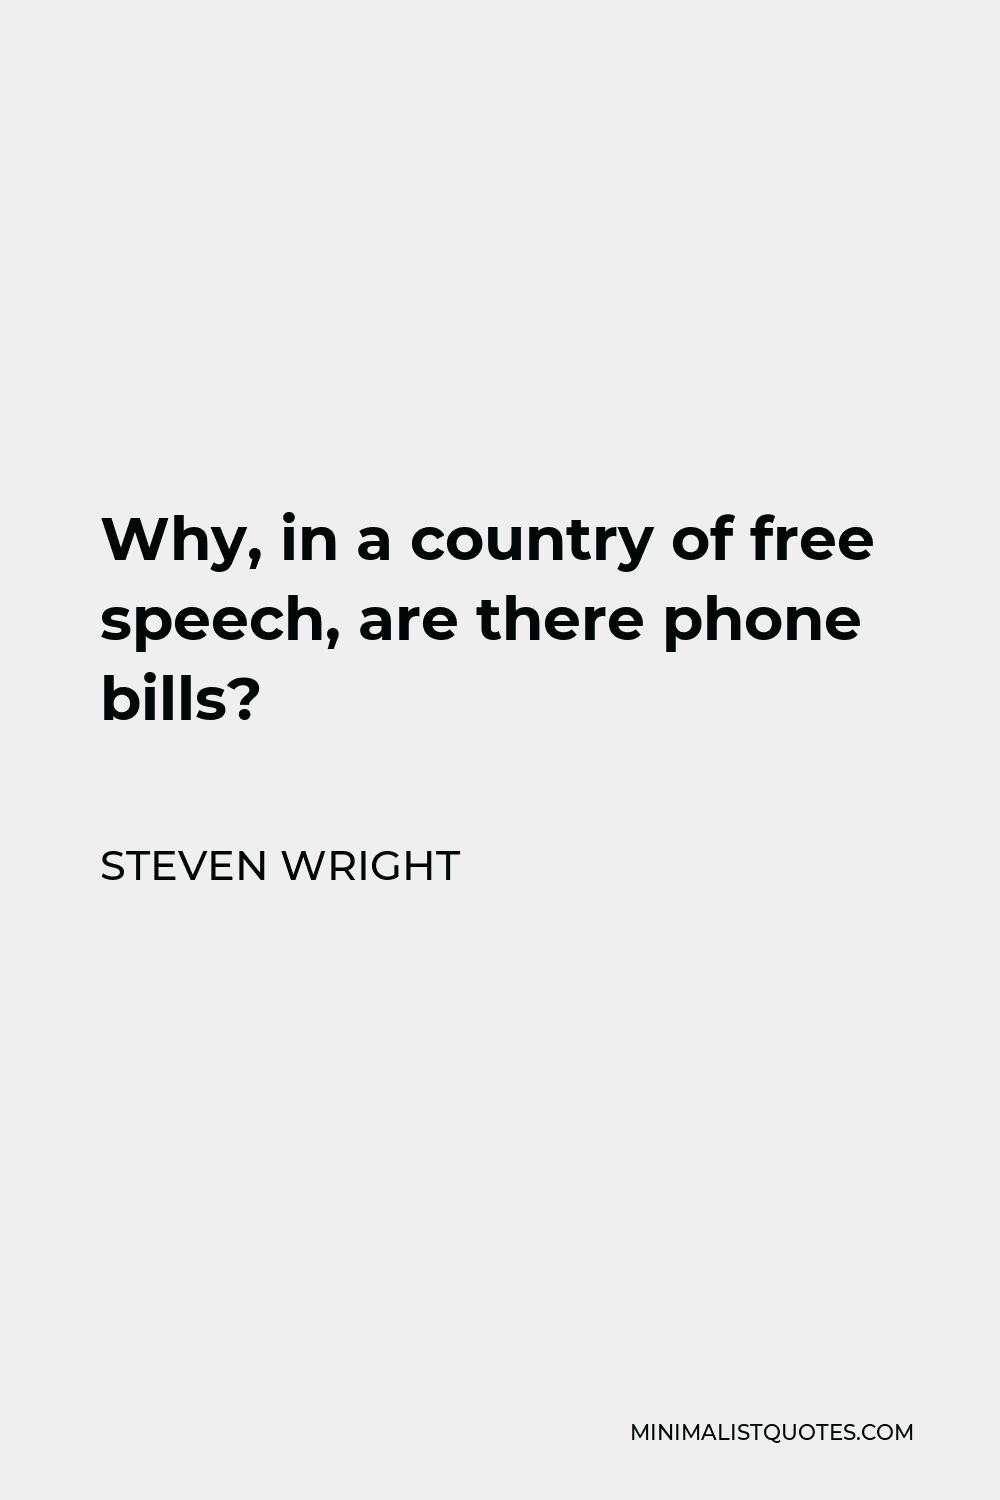 Steven Wright Quote - Why, in a country of free speech, are there phone bills?